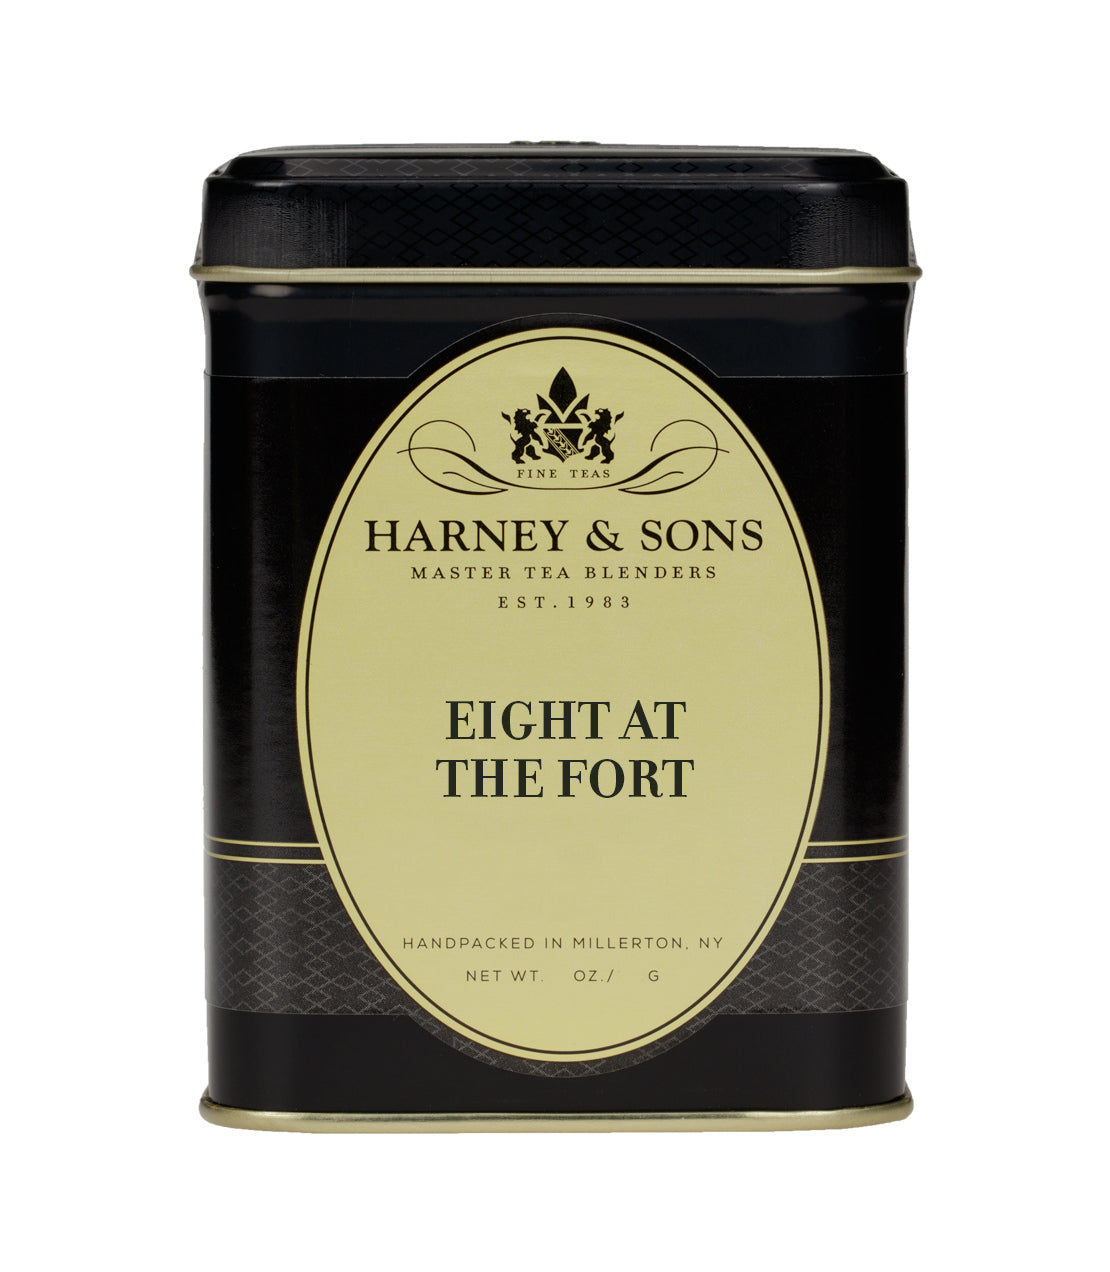 Eight at the Fort - Loose 4 oz. Tin - Harney & Sons Fine Teas